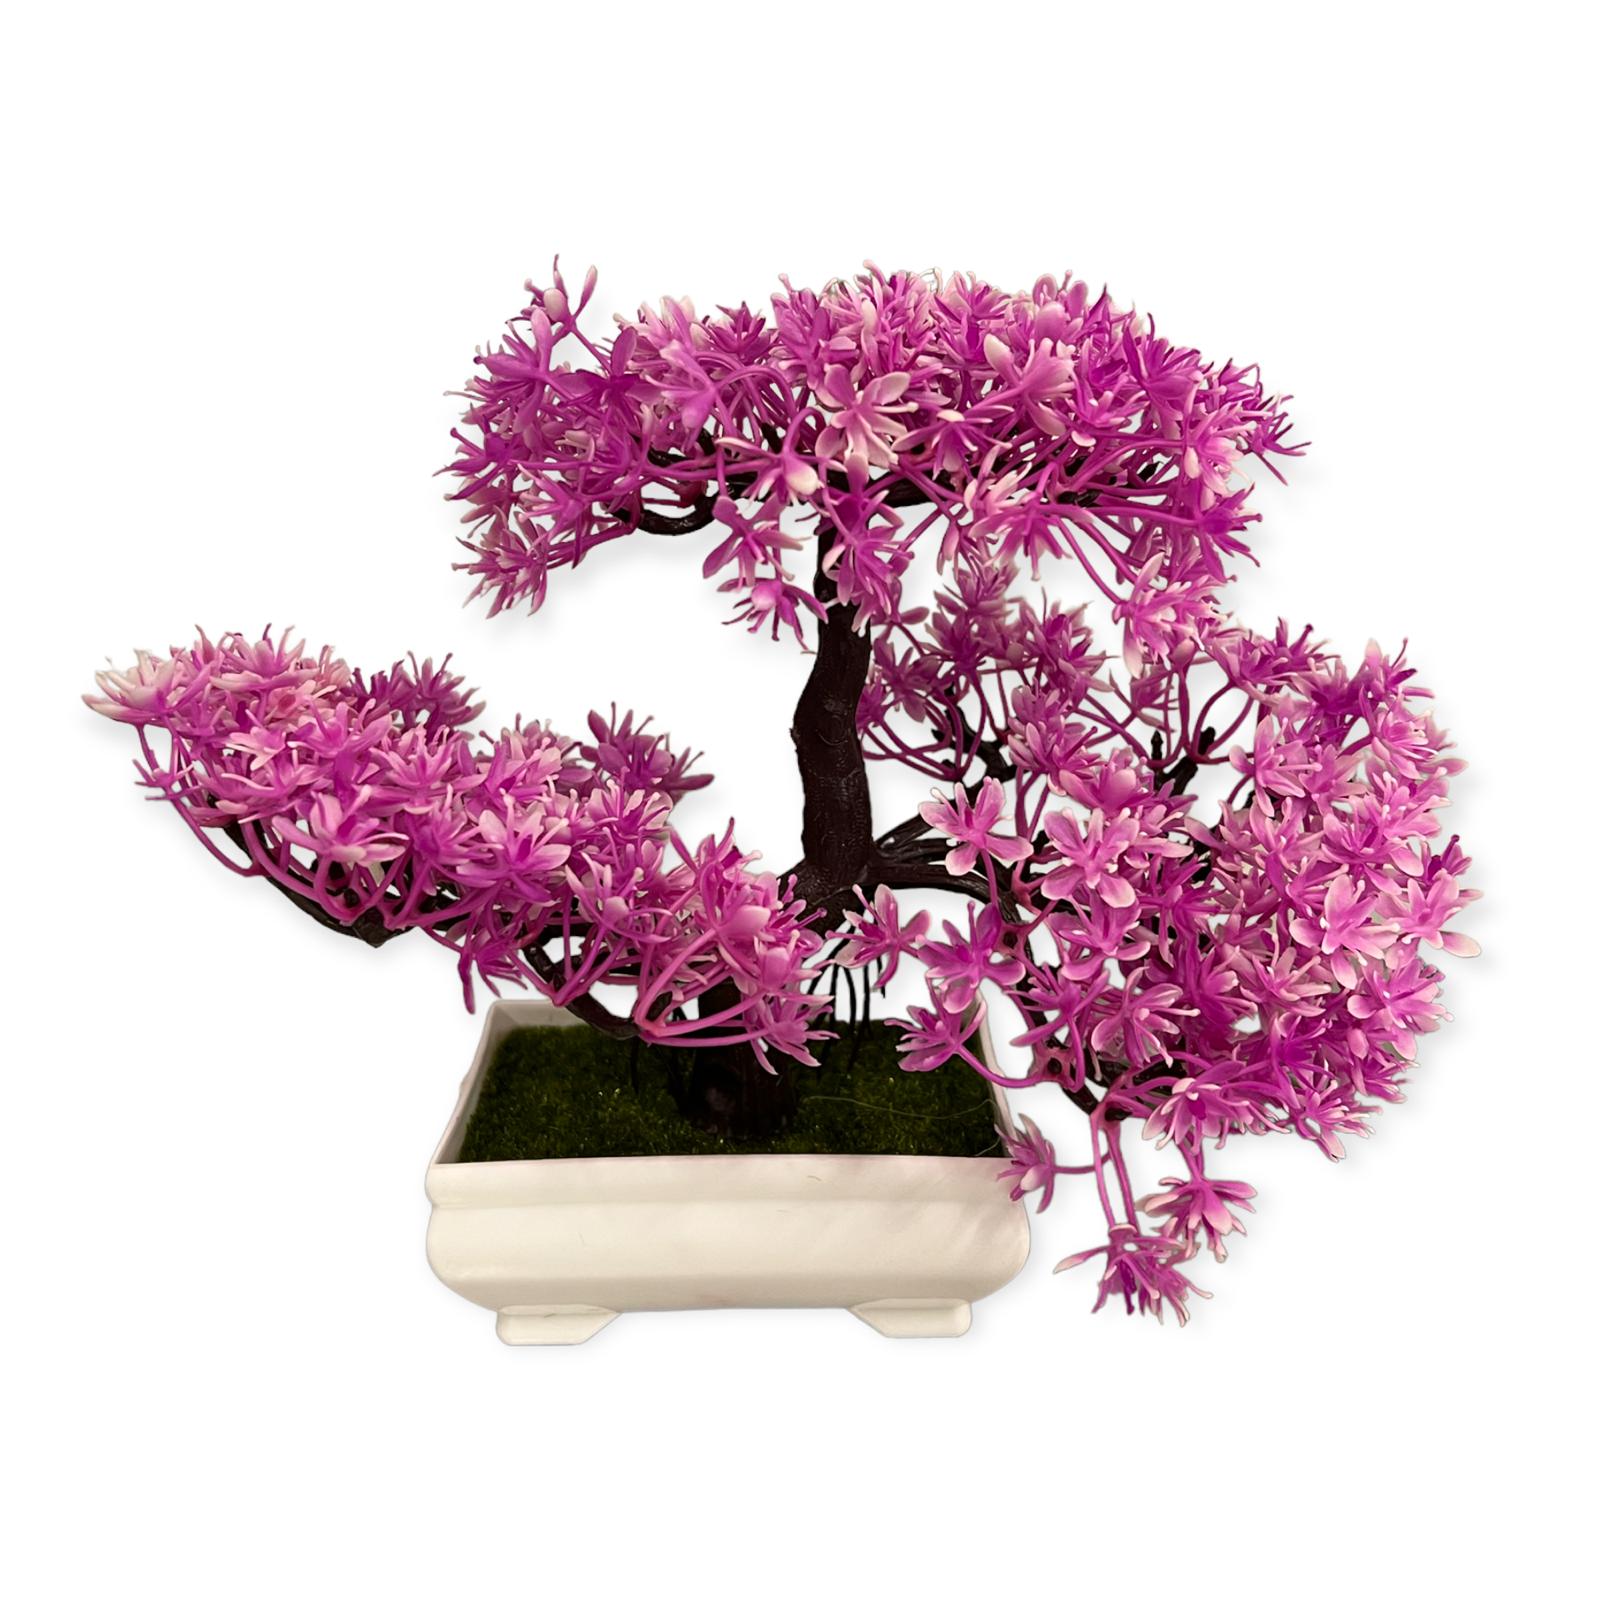 Artificial : Bonsai with Different Colored Leaves Online on Sale from HnG Nursery for trees & plants